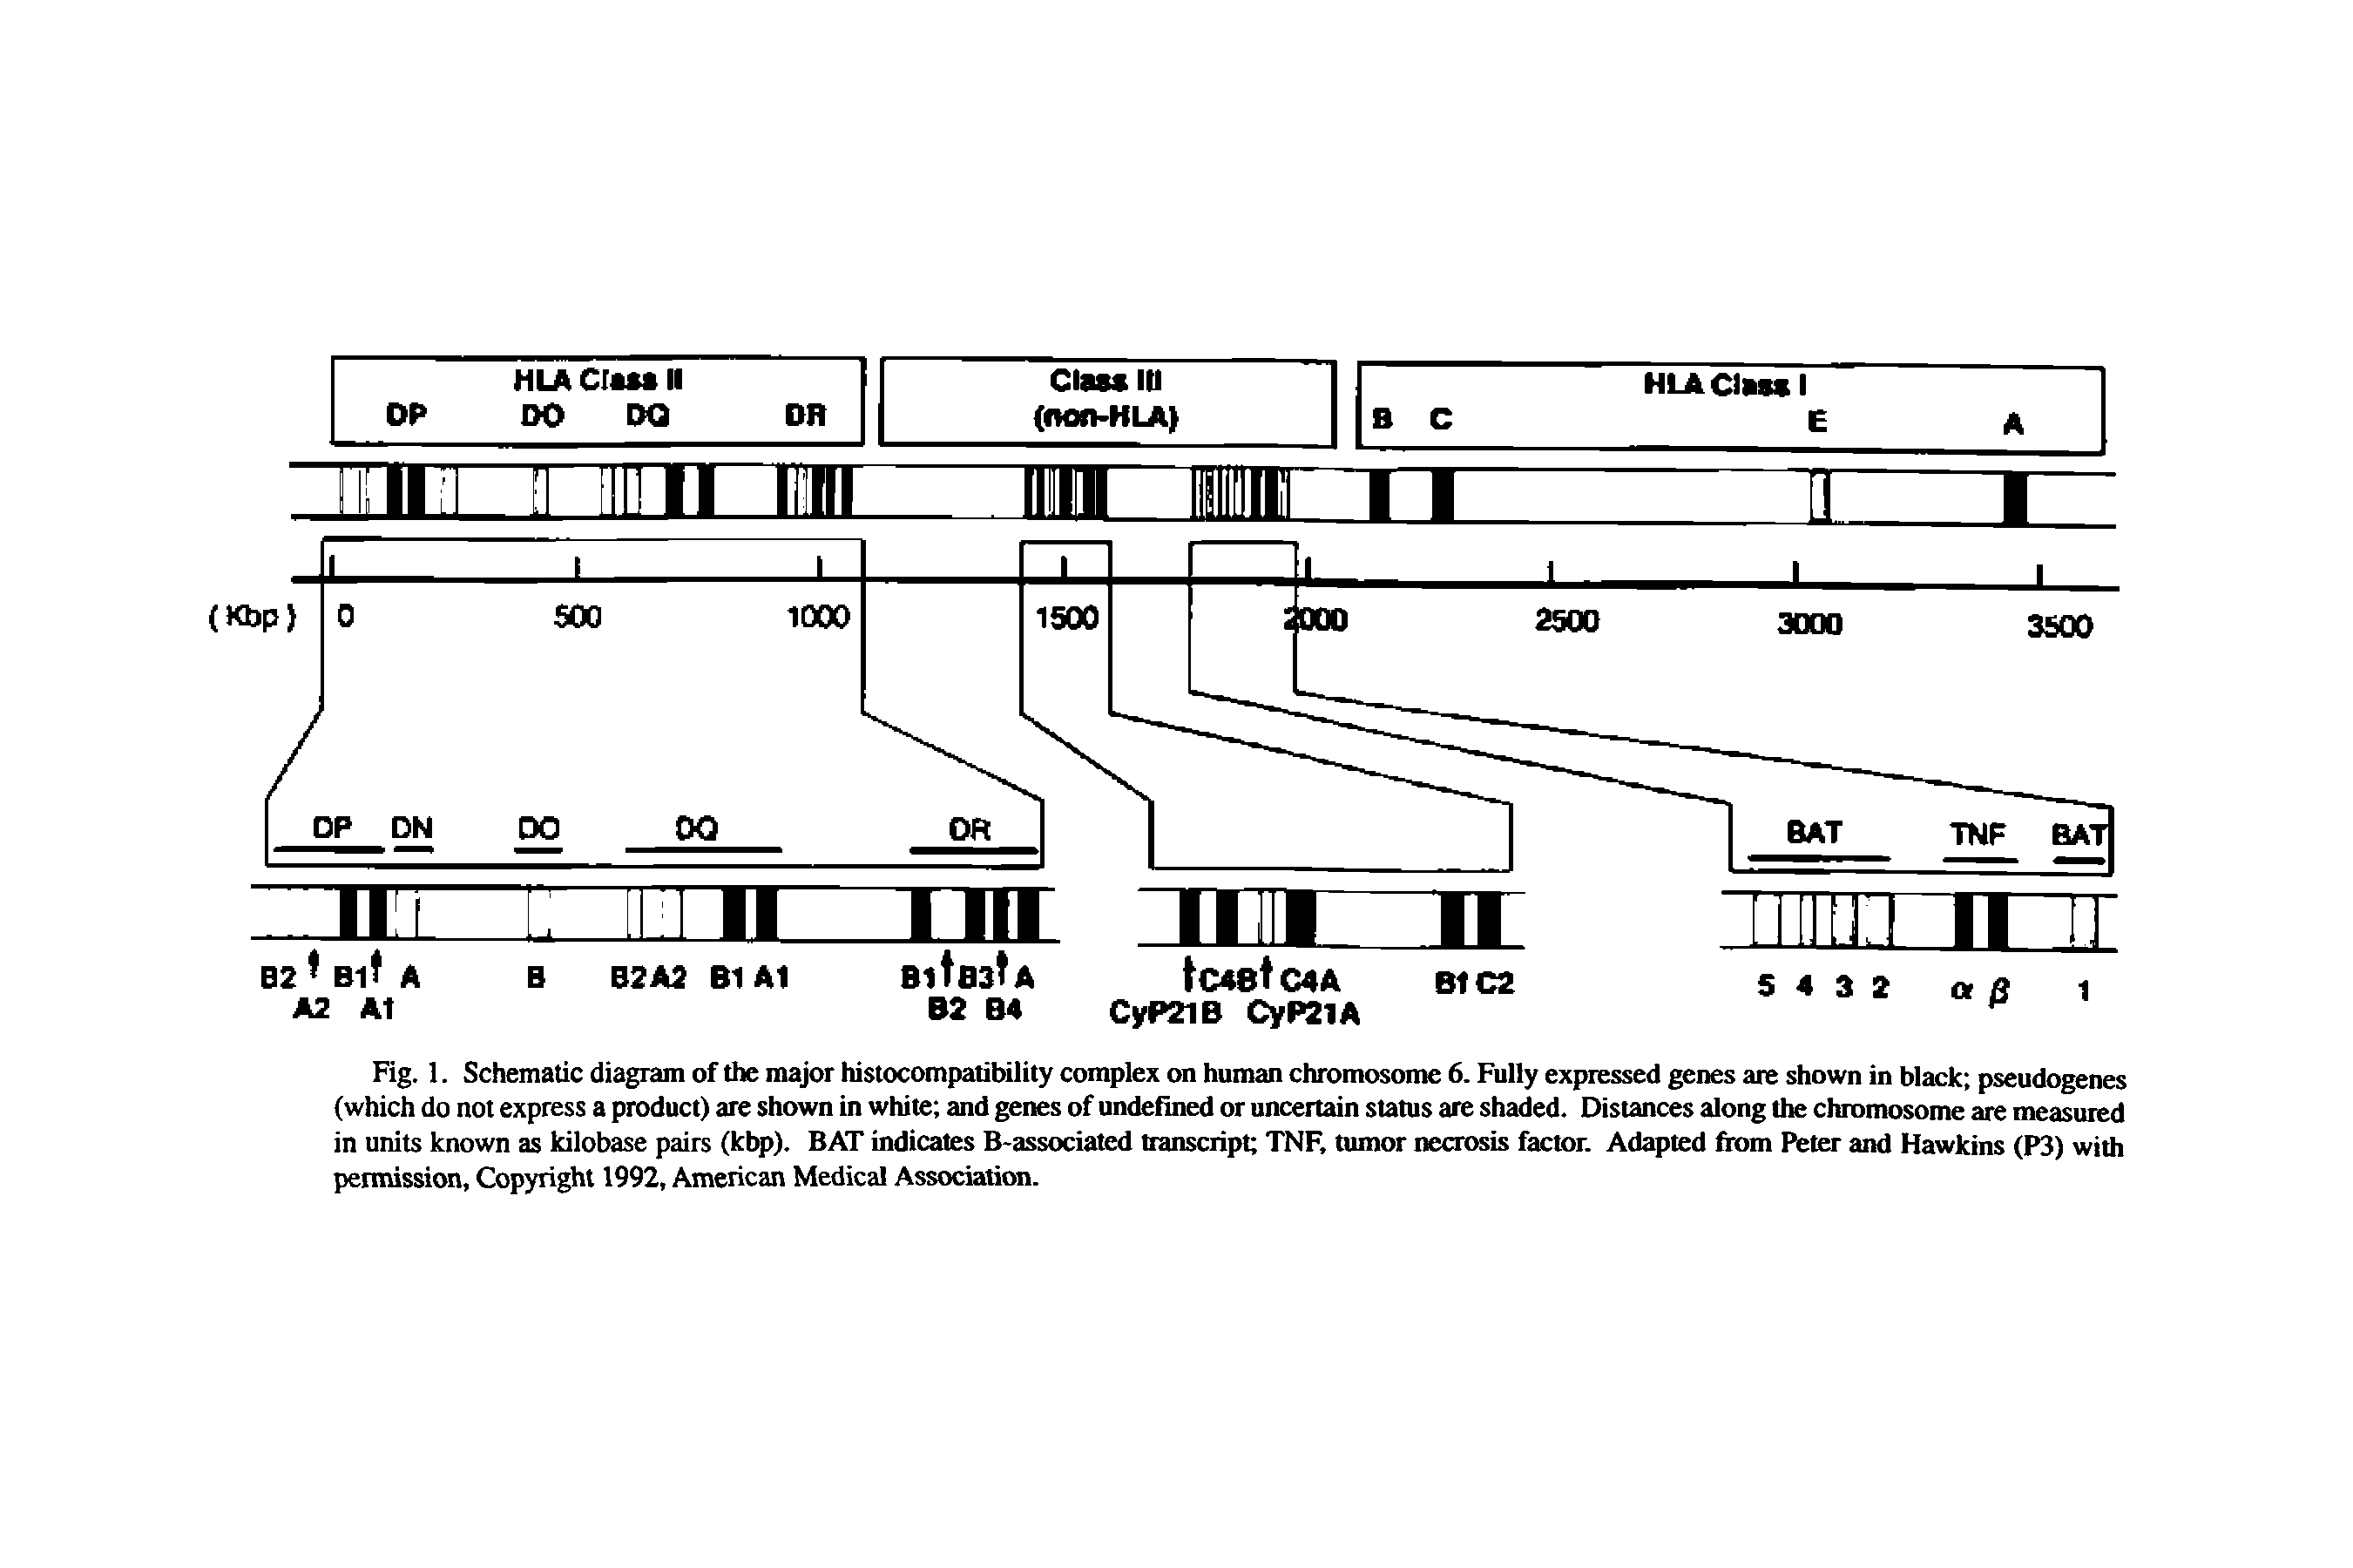 Fig. 1. Schematic diagram of the major histocompatibility complex on human chromosome 6. Fully expressed genes are shown in black pseudogenes (which do not express a product) are shown in white and genes of undefined or uncertain status are shaded. Distances along the chromosome are measured in units known as kilobase pairs (kbp). BAT indicates B-associated transcript TNF, tumor necrosis factor. Adapted fiom Peter and Hawkins (P3) with permission, Copyright 1992, American Medical Association.